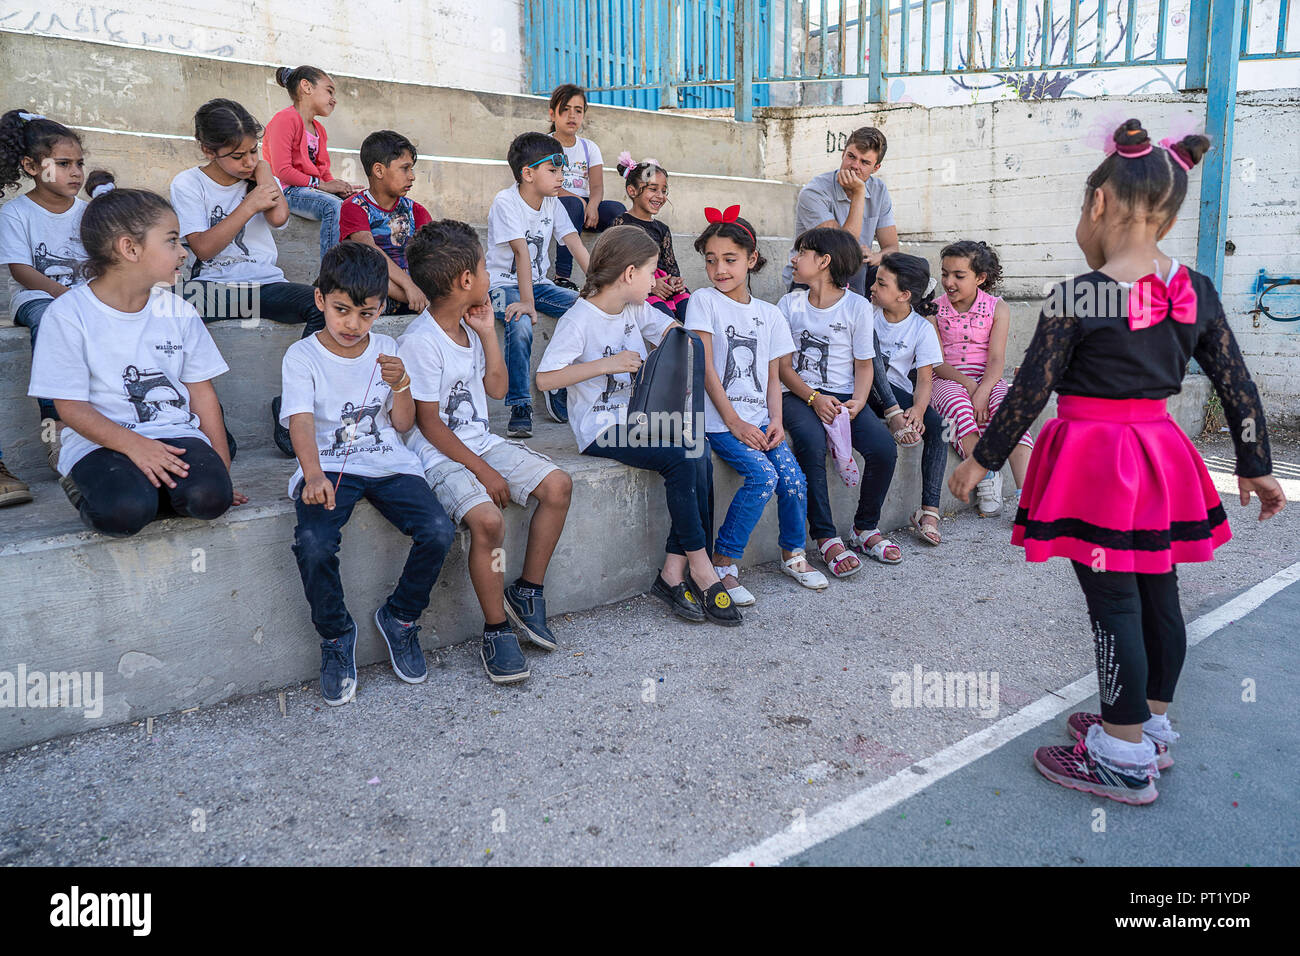 Bethlehem, Palestine. 16th Feb, 2018. Tolay seen singing to her classmates from outside the sports recreation area of the school during the summer camp.The Return Summer Camp was organised for children of the Aida refugee camp, it was established in 1950 by the Palestinians who were expelled from their homes from 27 towns throughout Palestine, namely Nasra, Tabaria, Jerusalem, Acre, Jaffa, Haifa and Hebron. This is a 4th generation of refugees, 130 children ranging from 4 to 16 years of age being overlooked by 20 instructors and volunteers and it was funded by the UN until 2000. (Credit Stock Photo